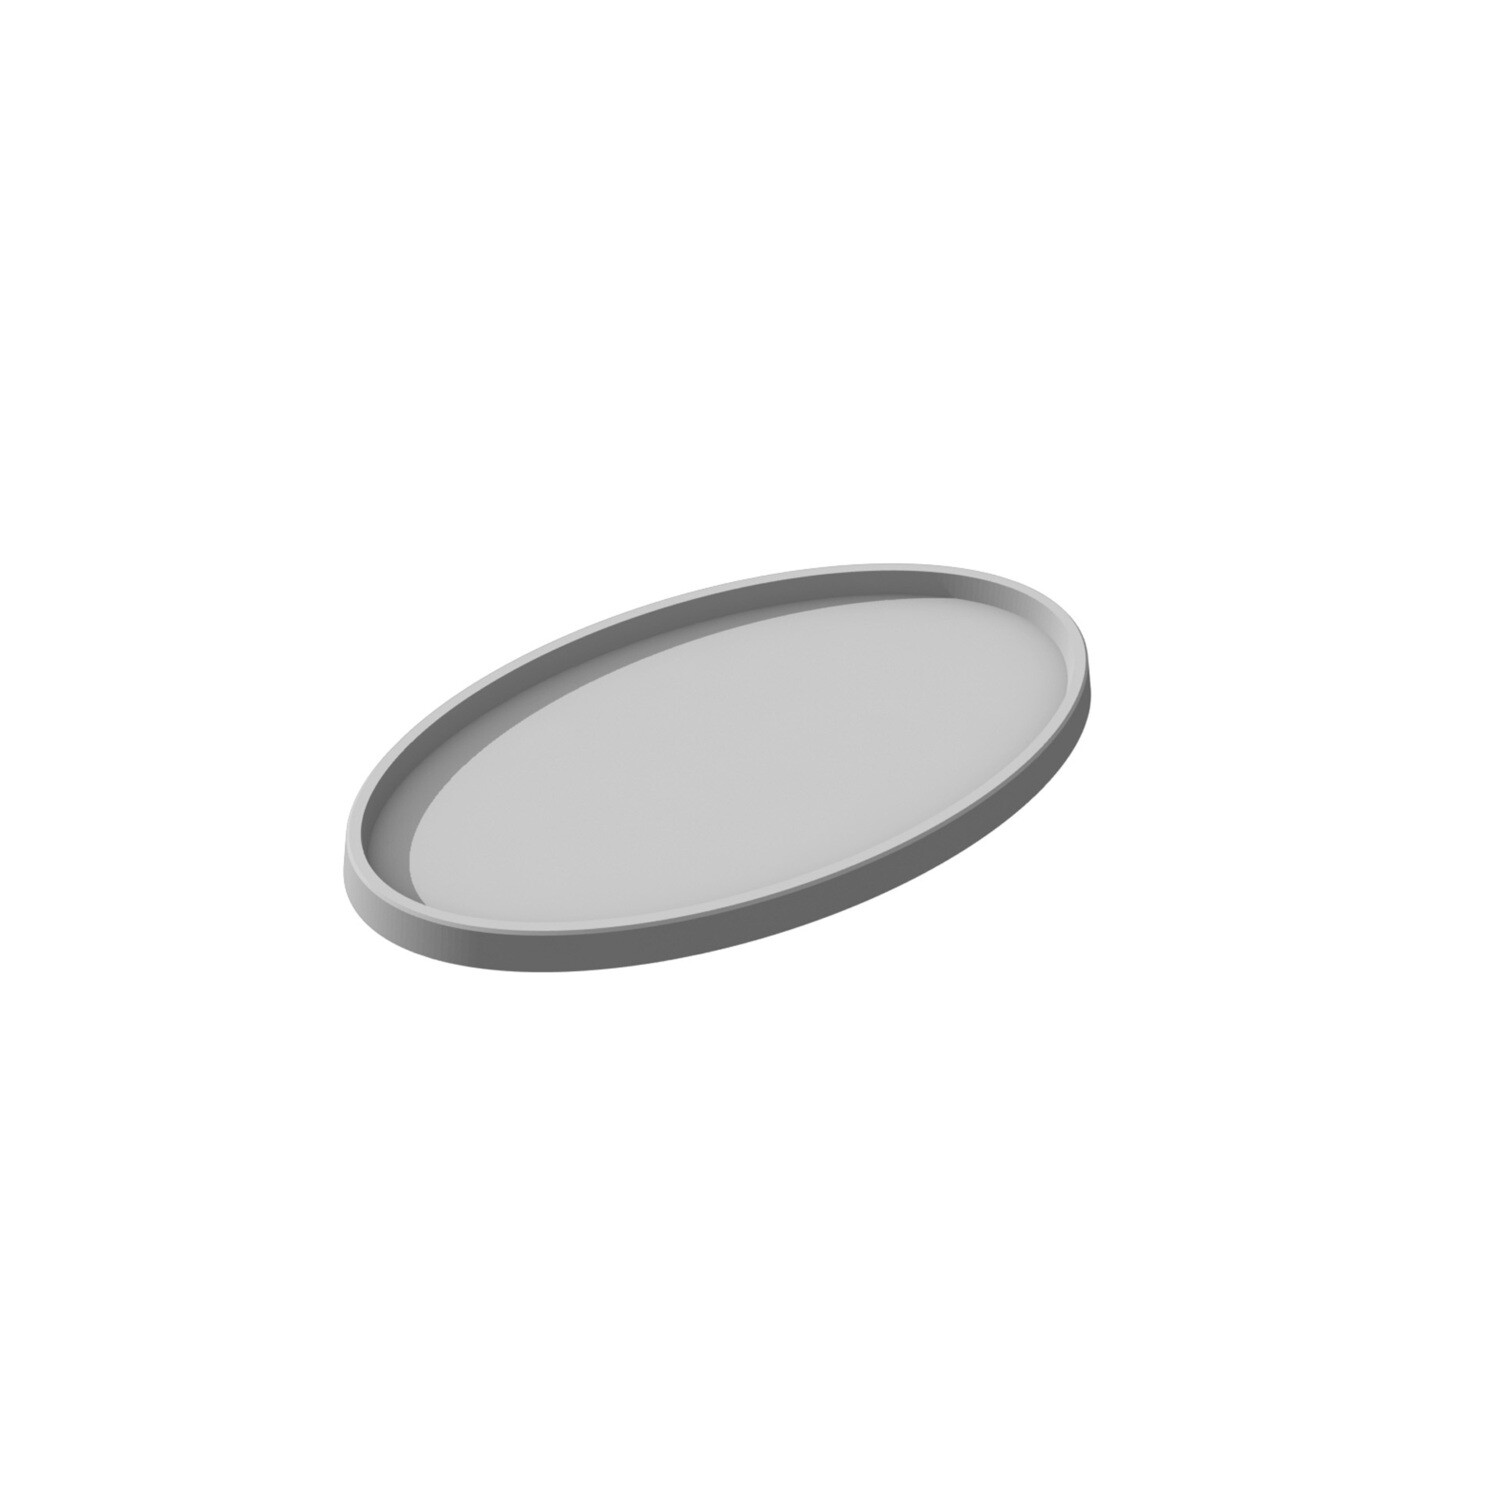 90 by 52mm Scooped Base, Oval